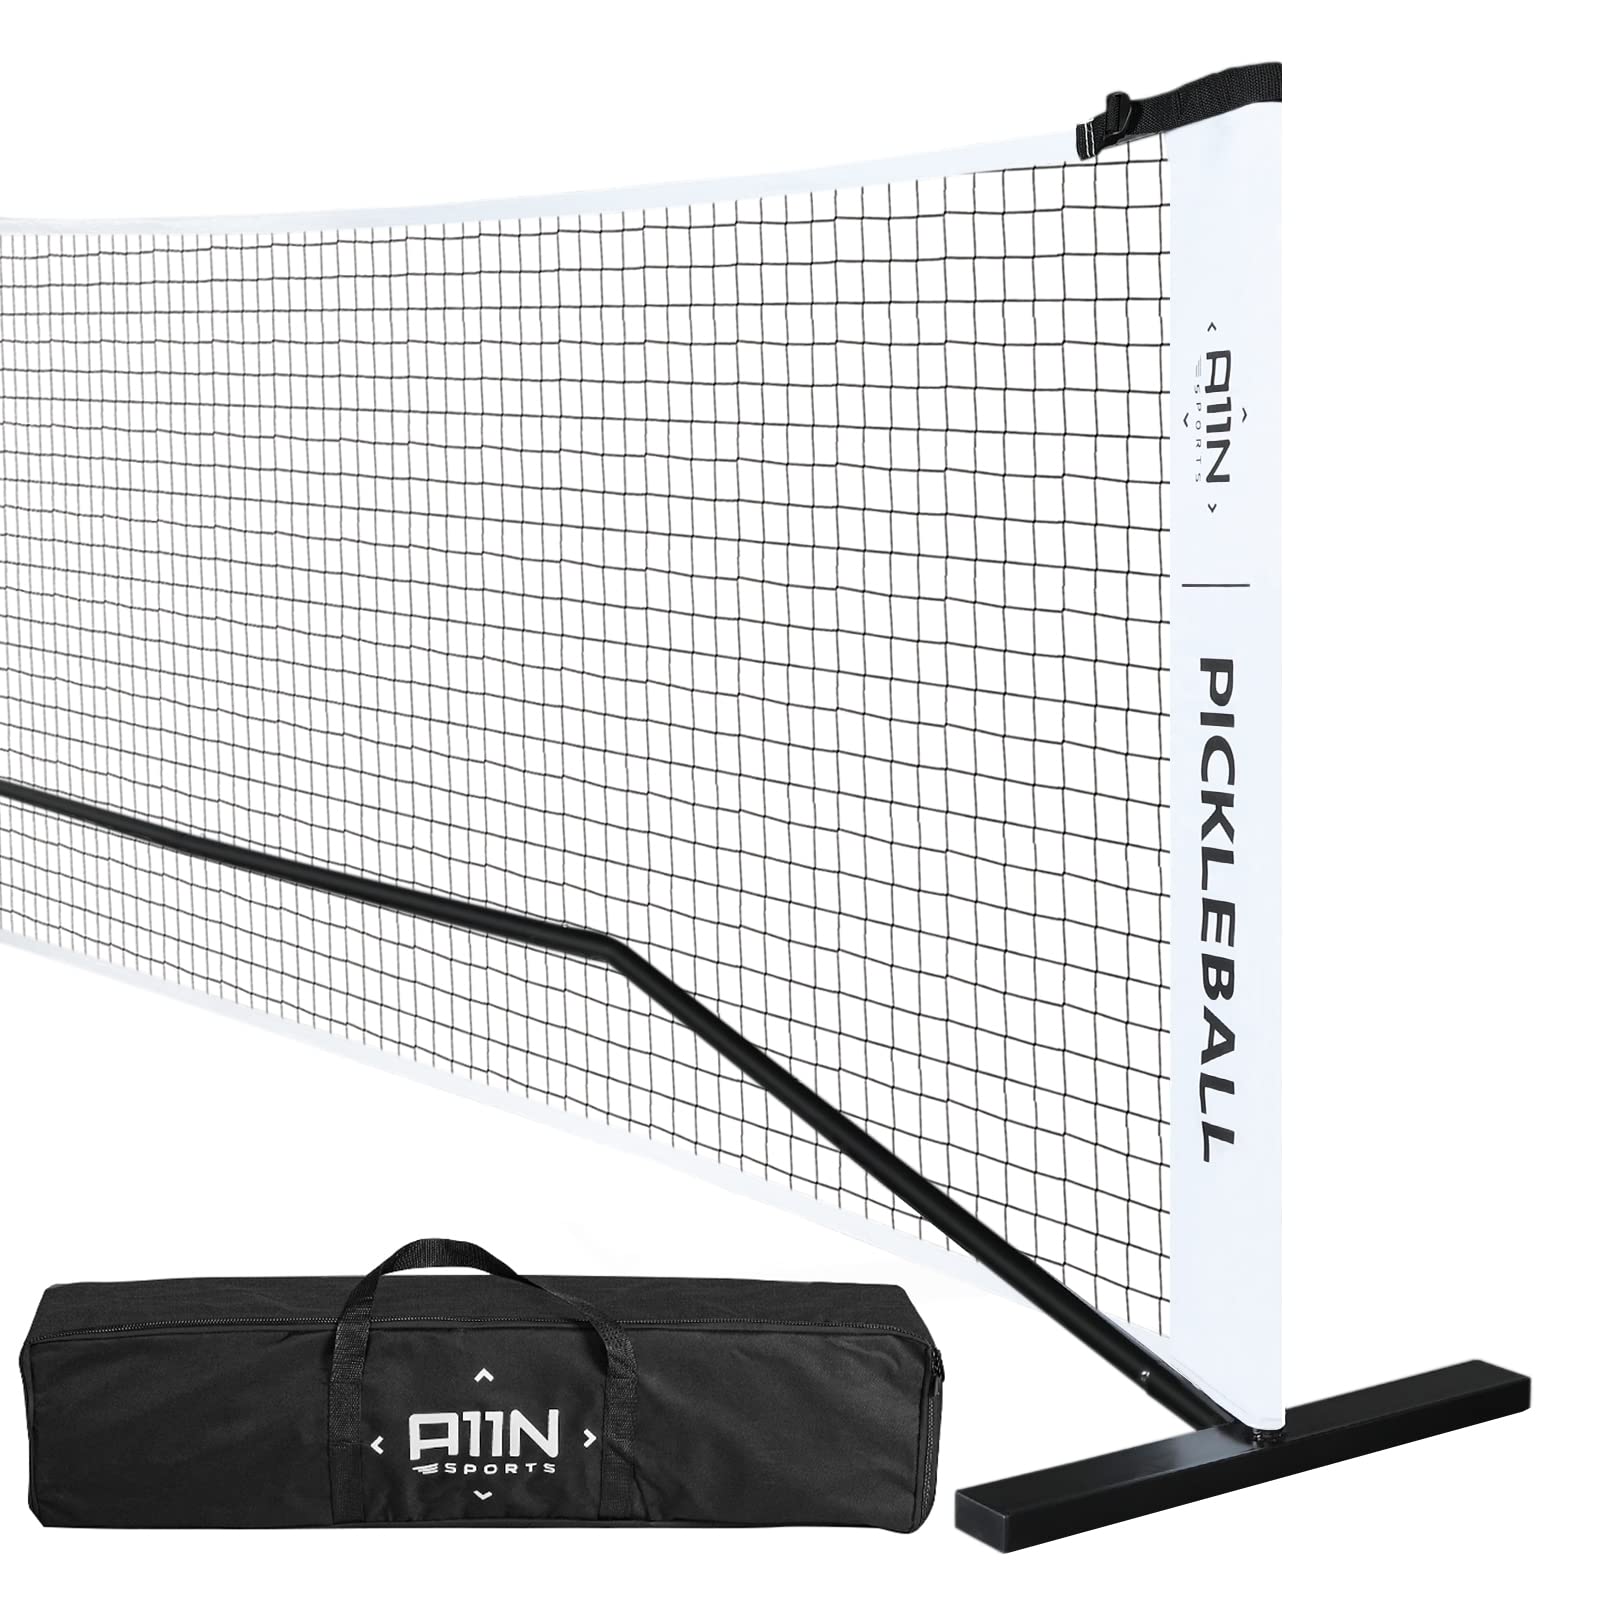 A11N SPORTS A11N Portable Pickleball Net System, Designed for All Weather Conditions with Steady Metal Frame and Strong PE Net, Regulation Size Net with Carrying Bag